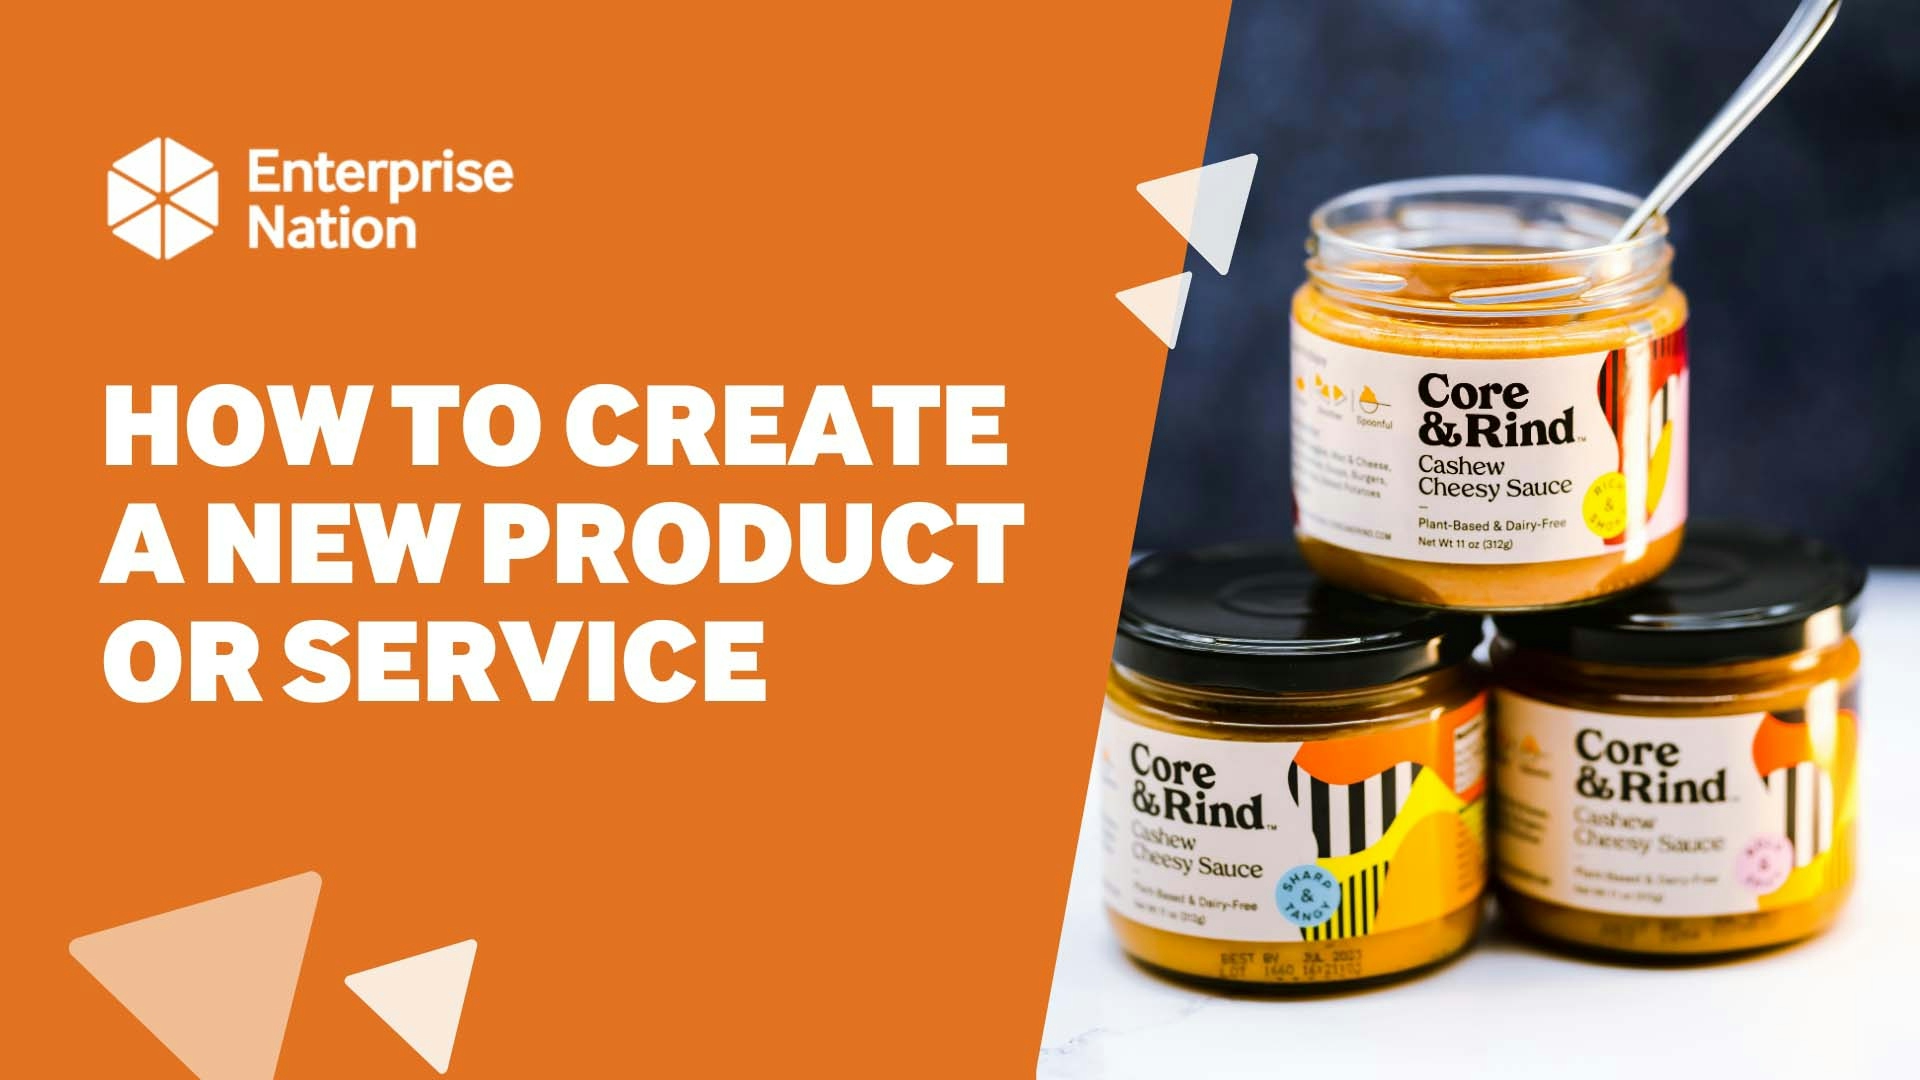 How to create a new product or service